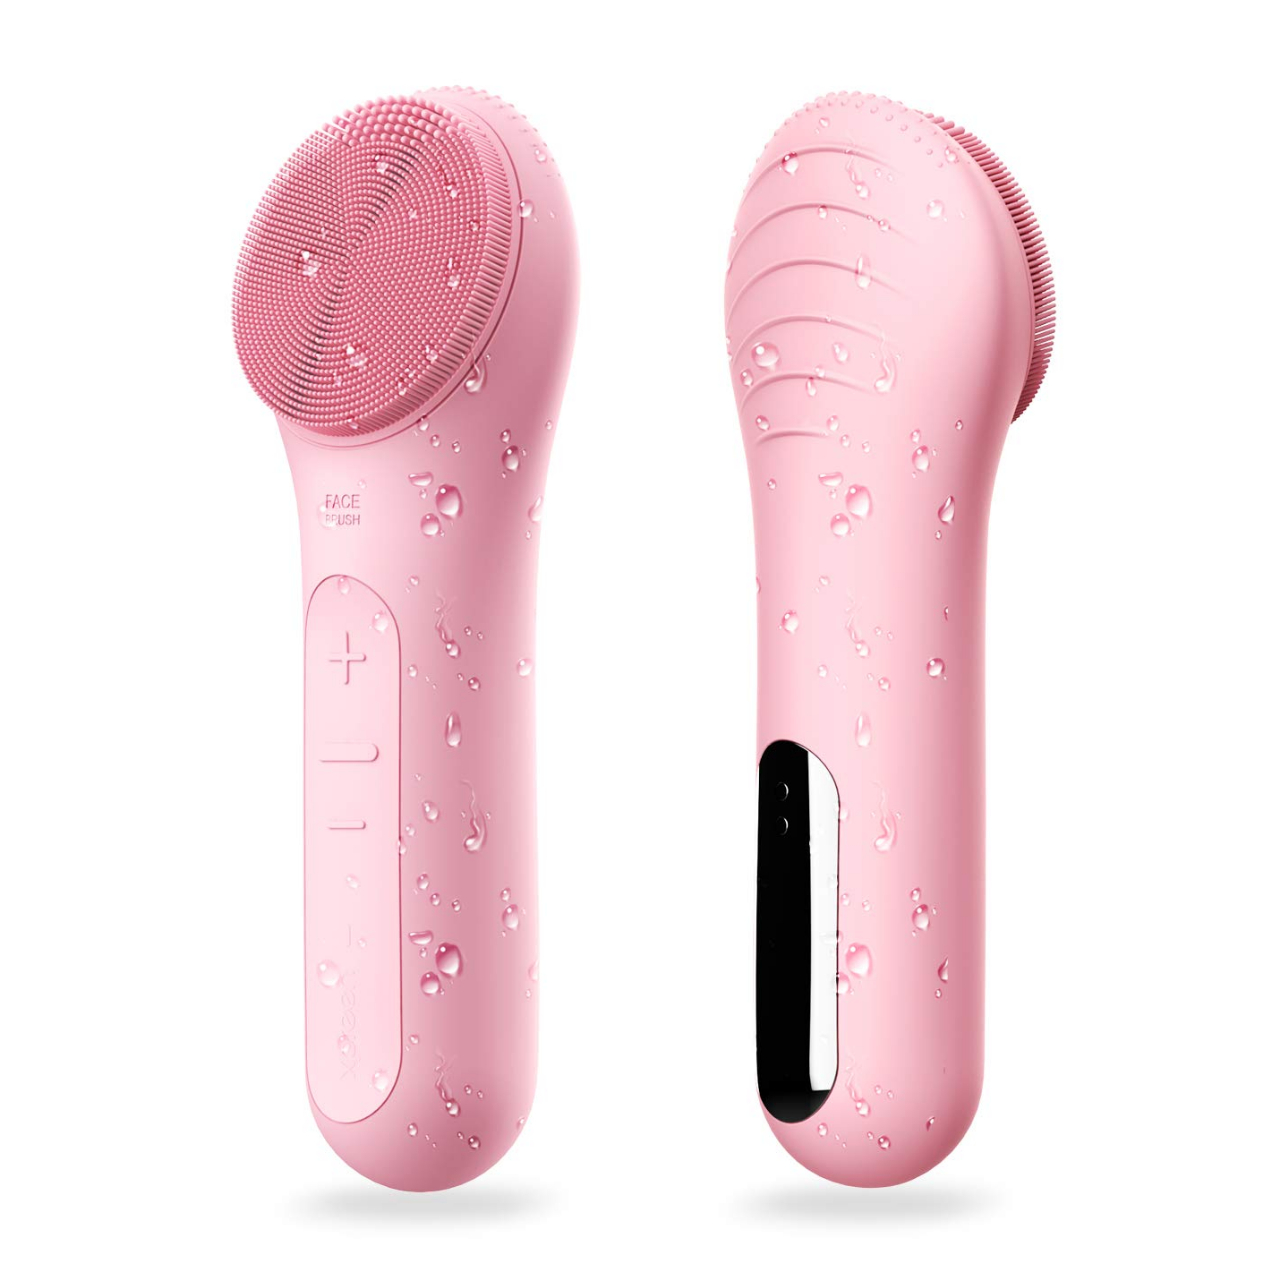 Sonic Facial Cleansing Brush Waterproof Electric Bold Products Instant Lifestyle And Beauty